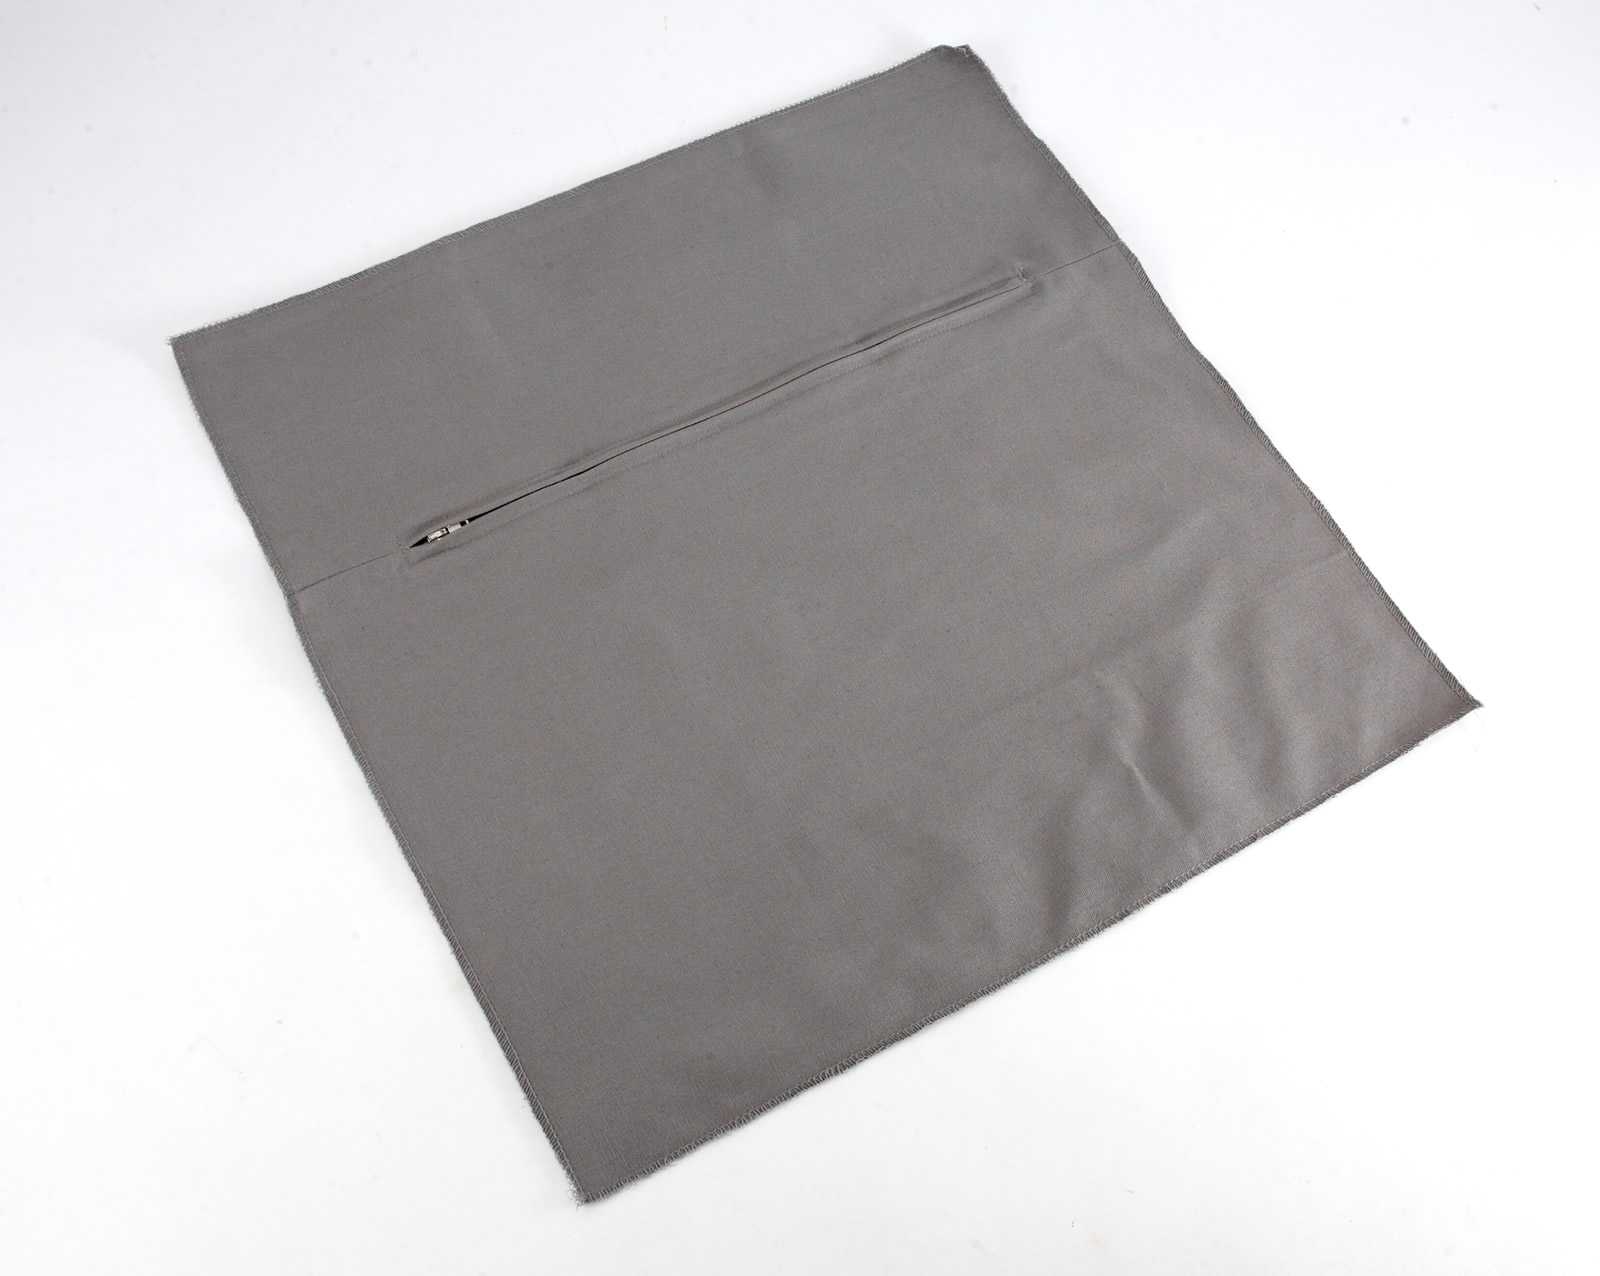 Cushion Back with Zip - Grey 45 x 45cm (18 x 18in)